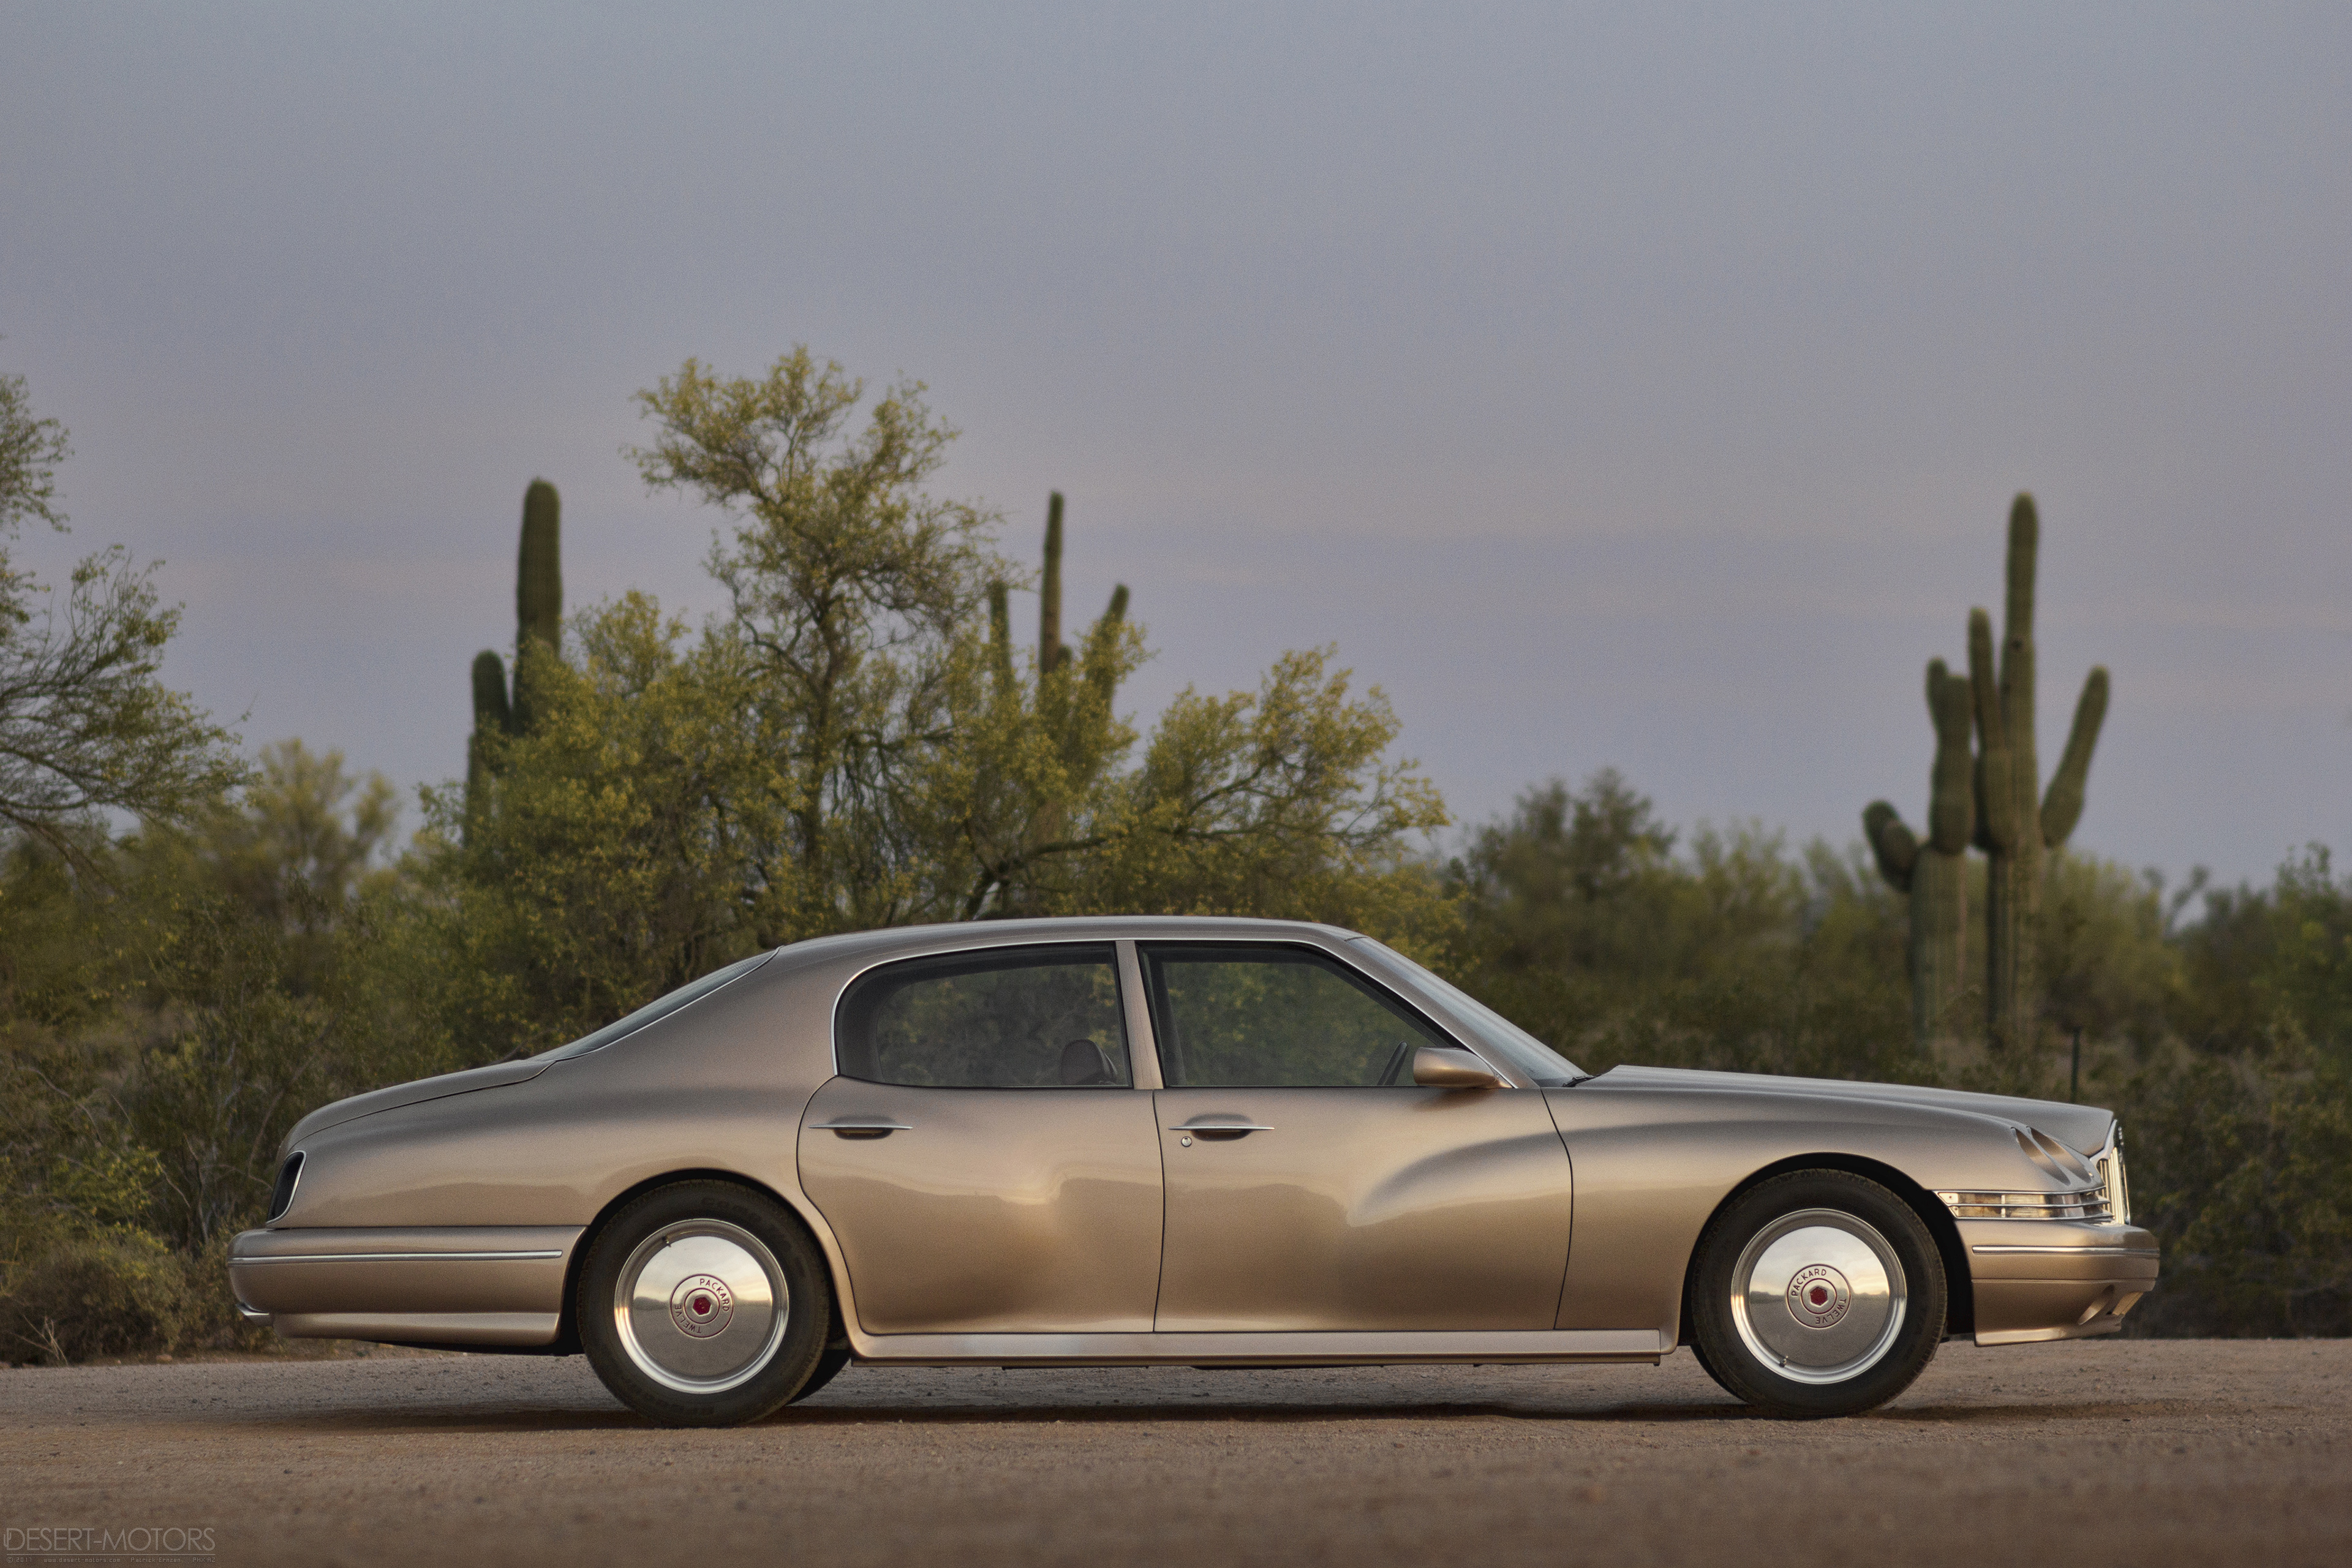 General 3840x2560 Packard concept cars desert American cars side view sky cactus vehicle car ground